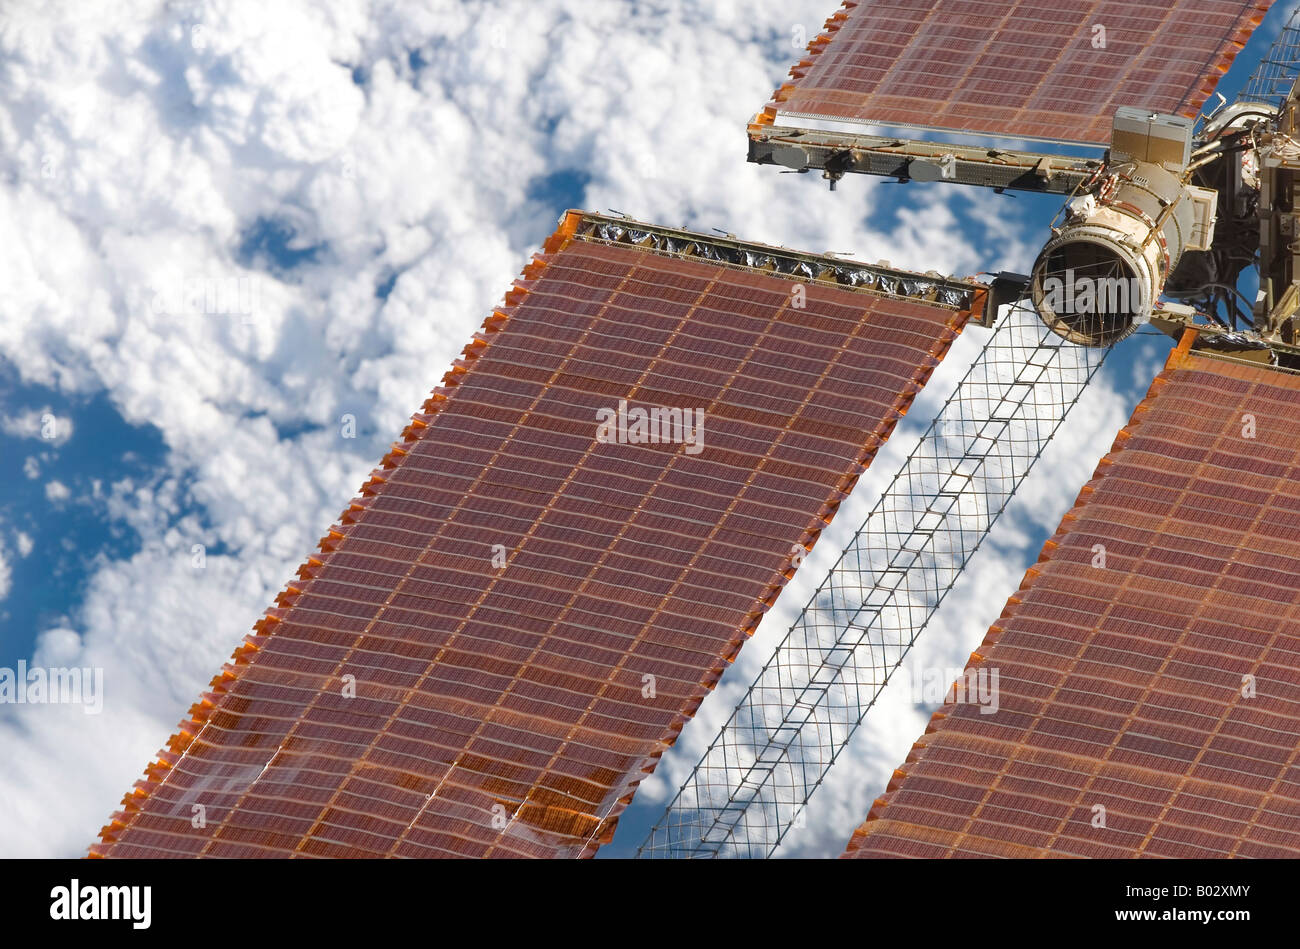 A close-up view of the solar arrays on the International Space Station. Stock Photo